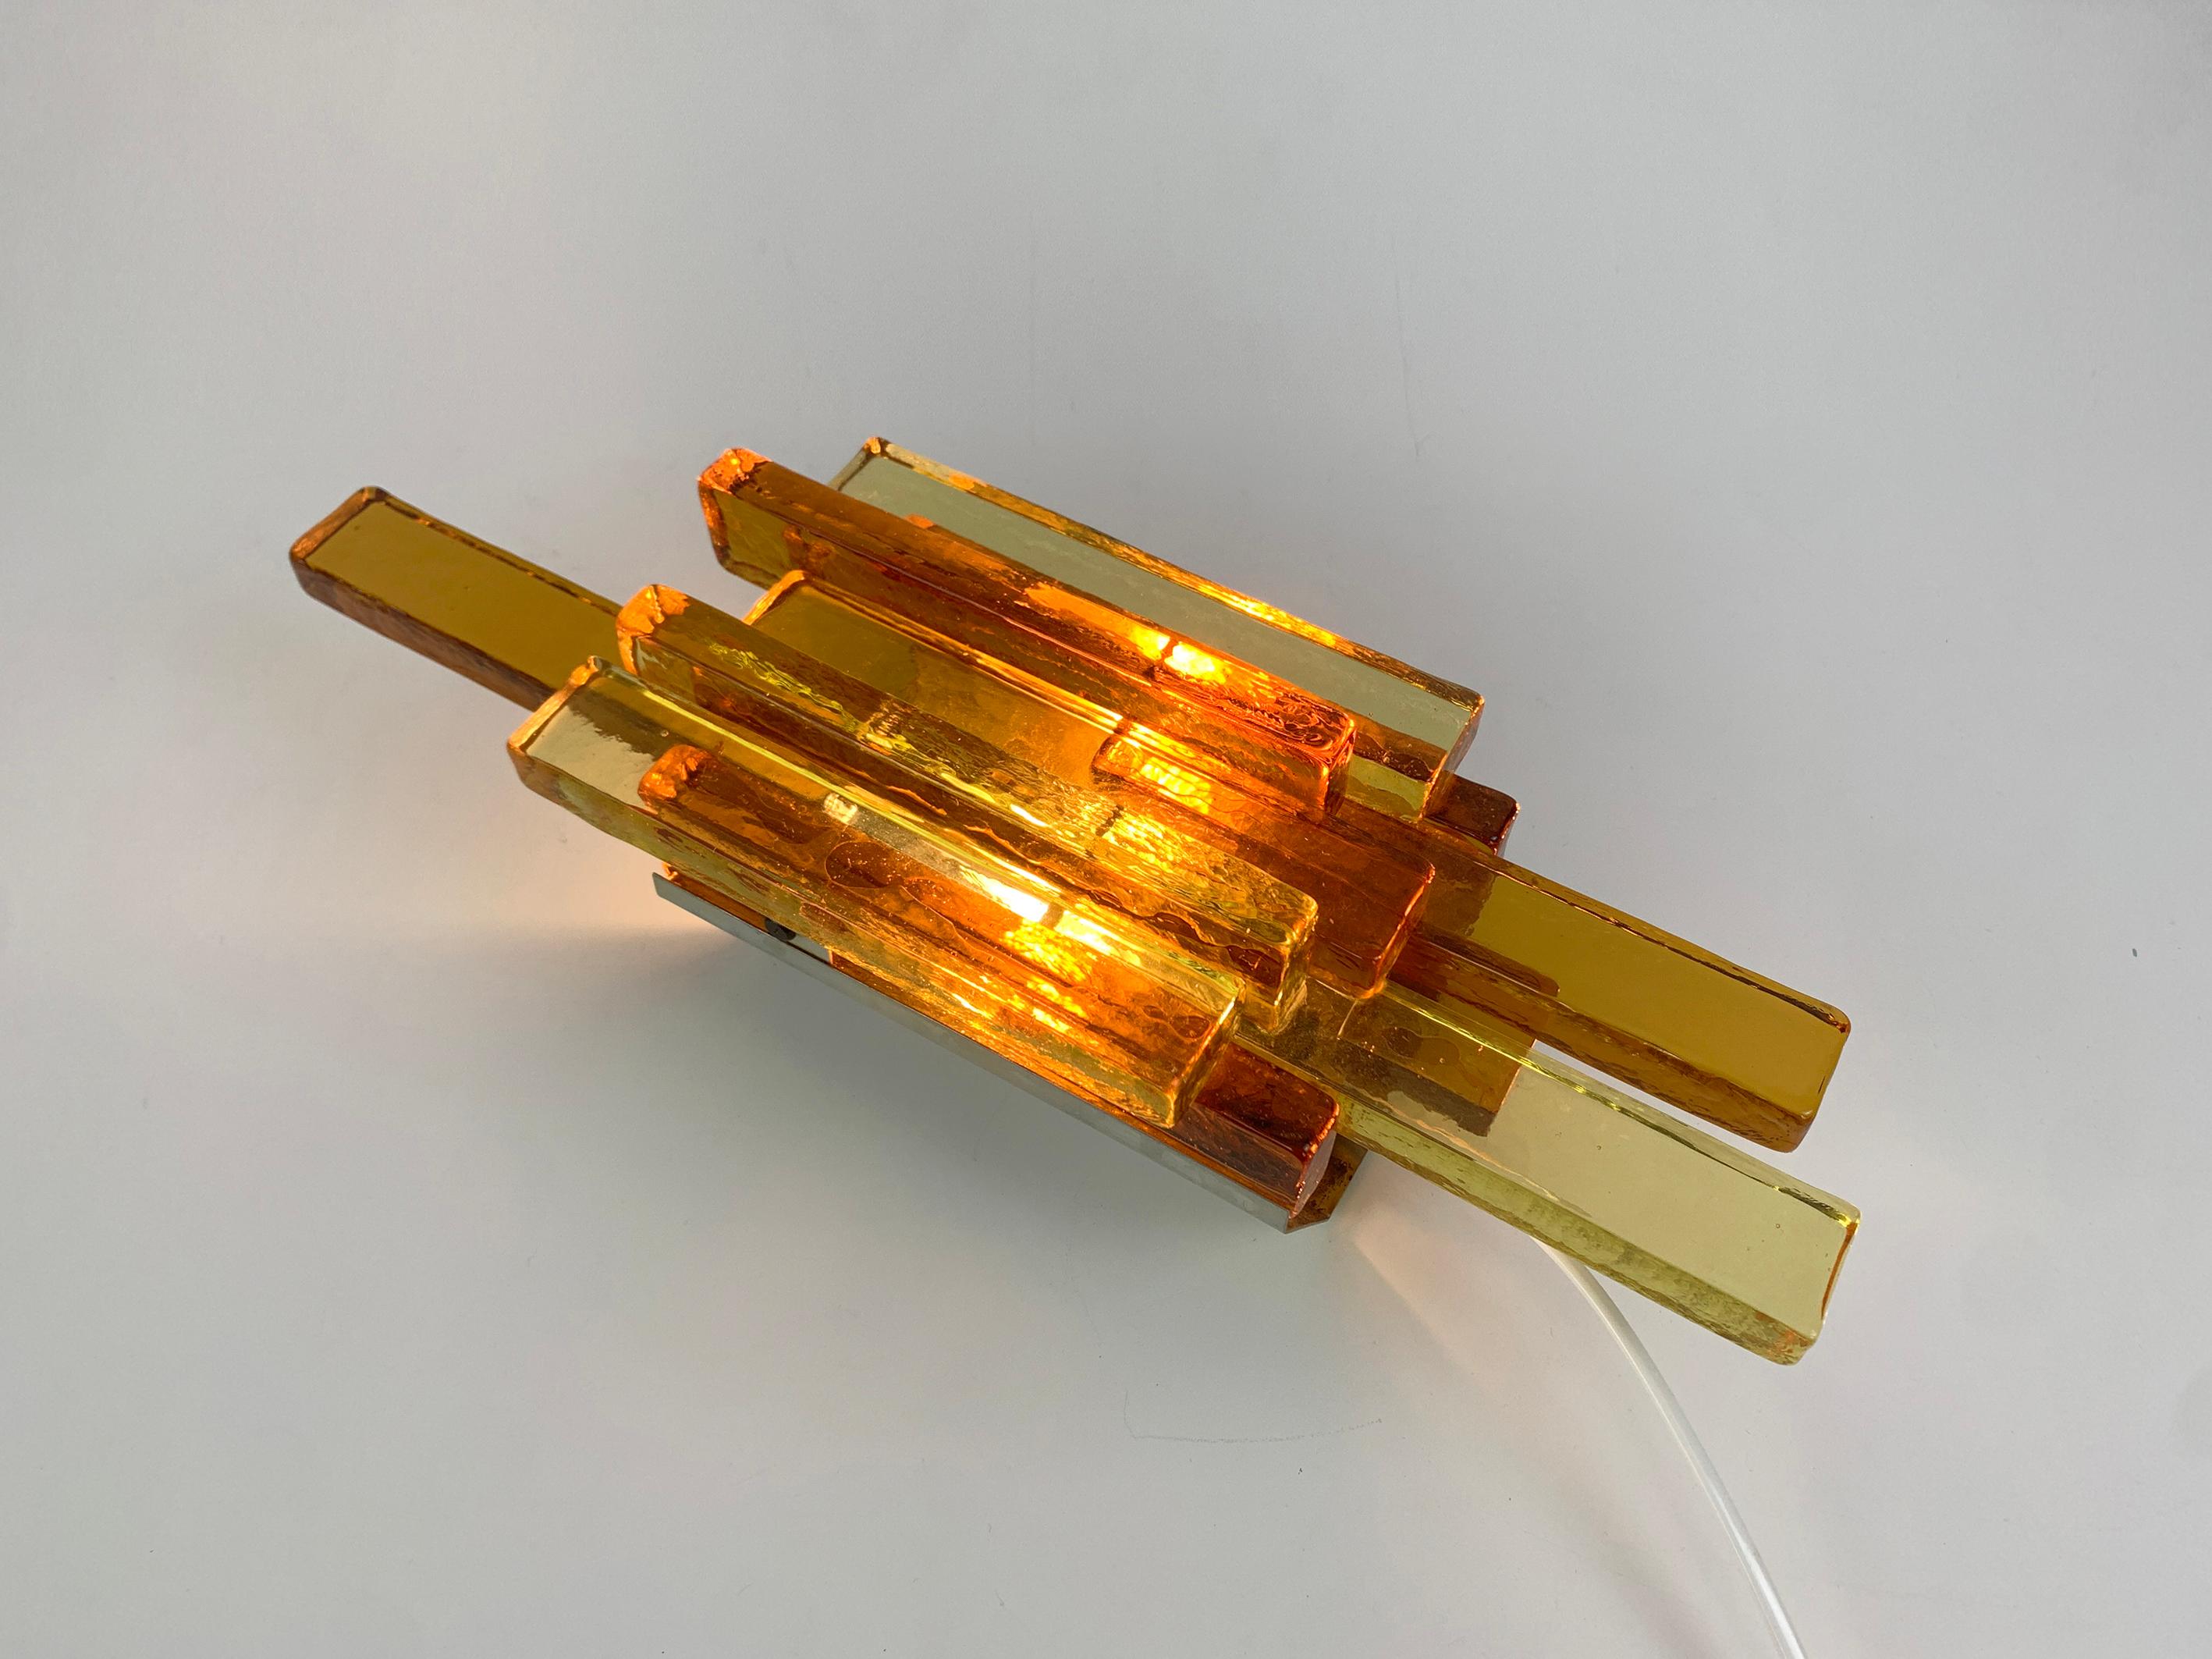 Wall lamp by Svend Aage Holm Sørensen.
Assembly of thick yellow, amber and orange glass bricks which give an amazing light effect.
The glass composition is attached to a wall fixing made of sheet metal.
Svend Aage Holm Sørensen (1913-2004) was a